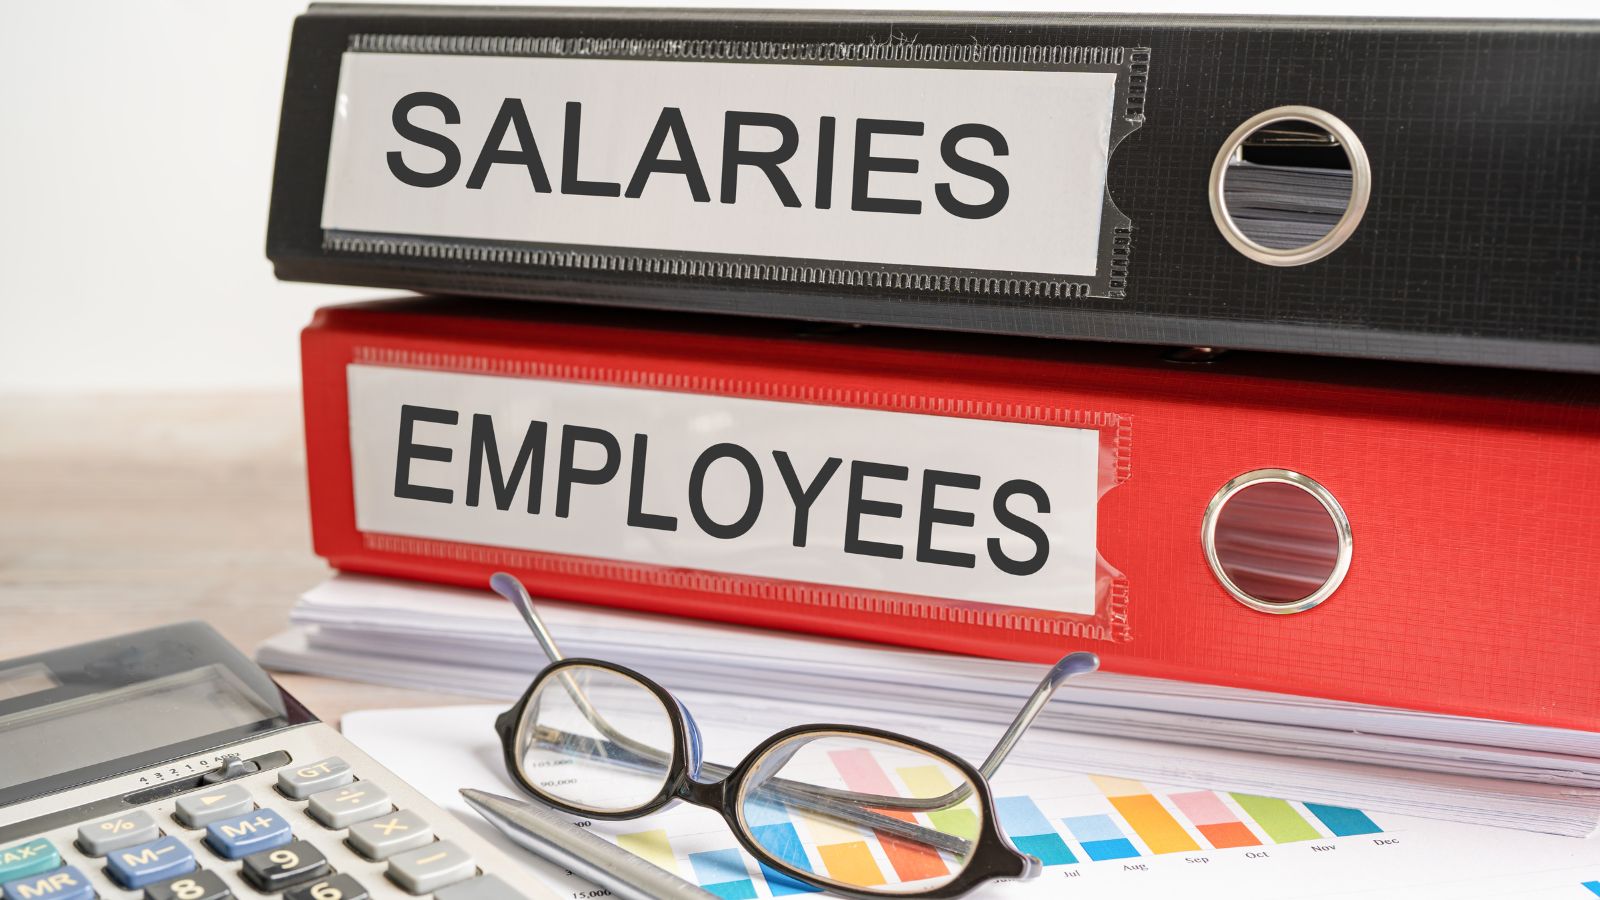 accountant for starting a business can help with employee salaries. Image showing binders labeled "salaries" and "employees".